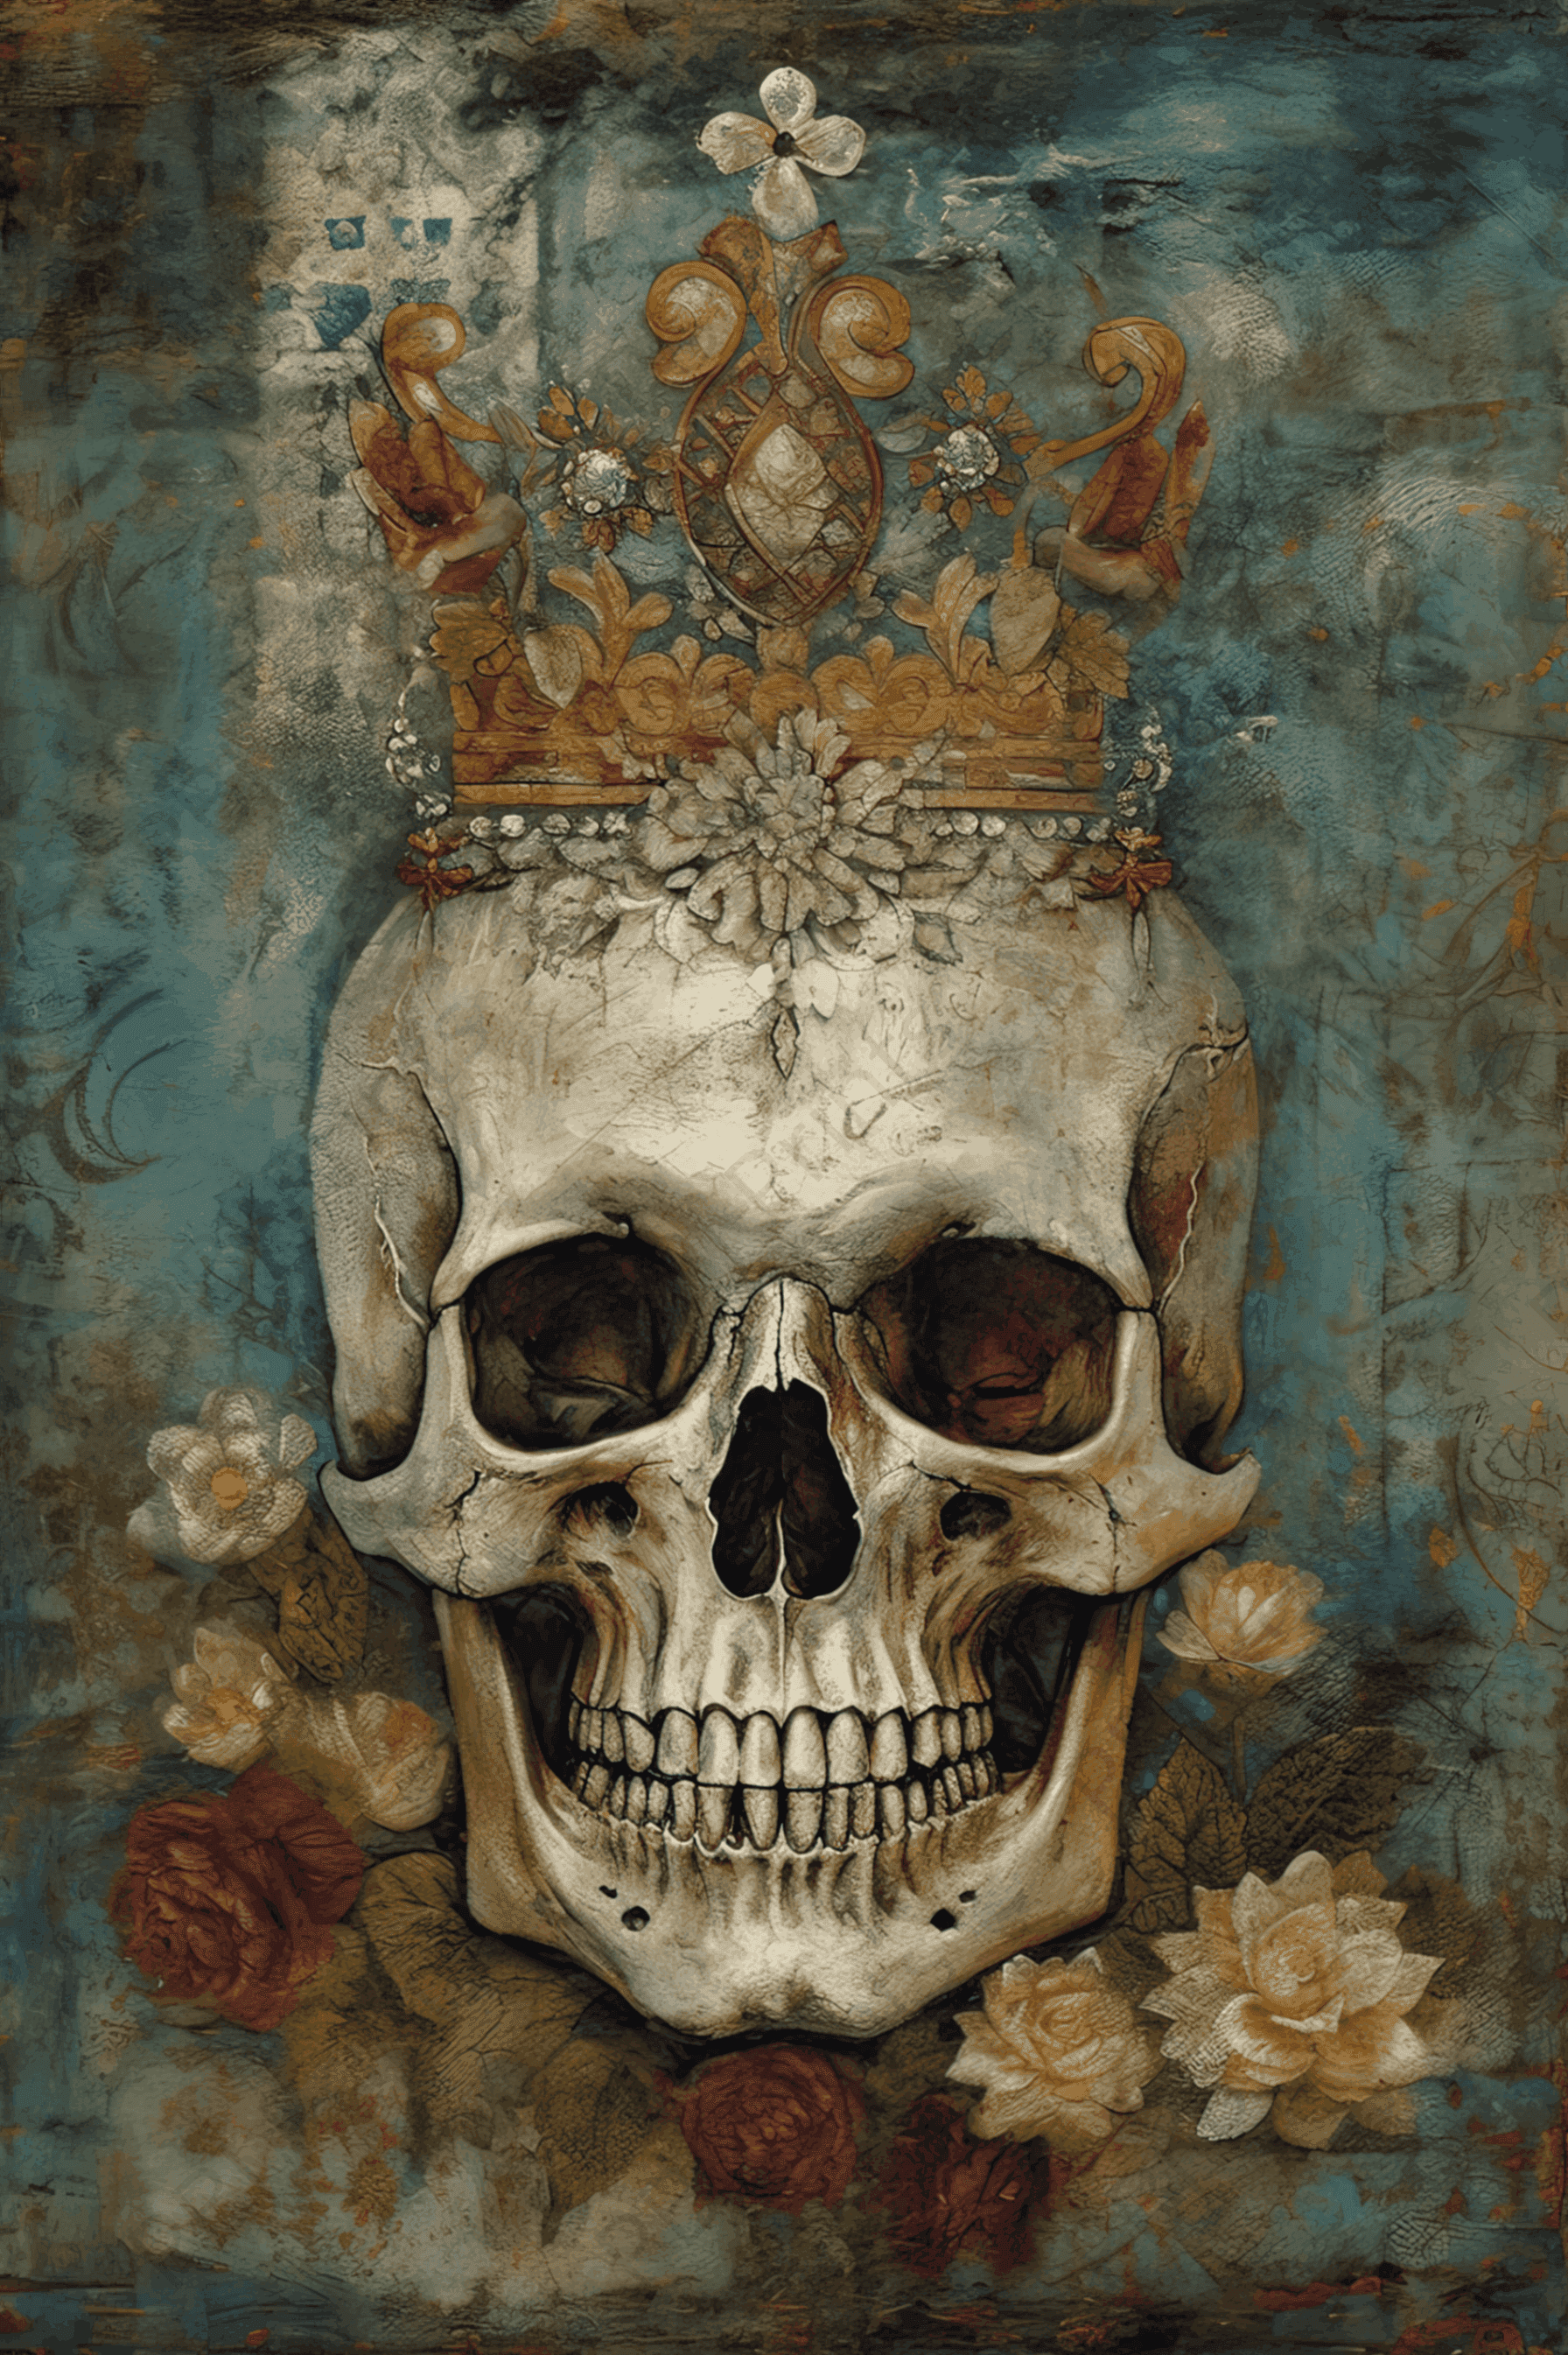 Skull Queen - Artist by Whimsykel Designs - Art Prints, Decoupage Rice Paper, Flat Canvas Prints, Giclee Prints, Photo Prints, Poster Prints